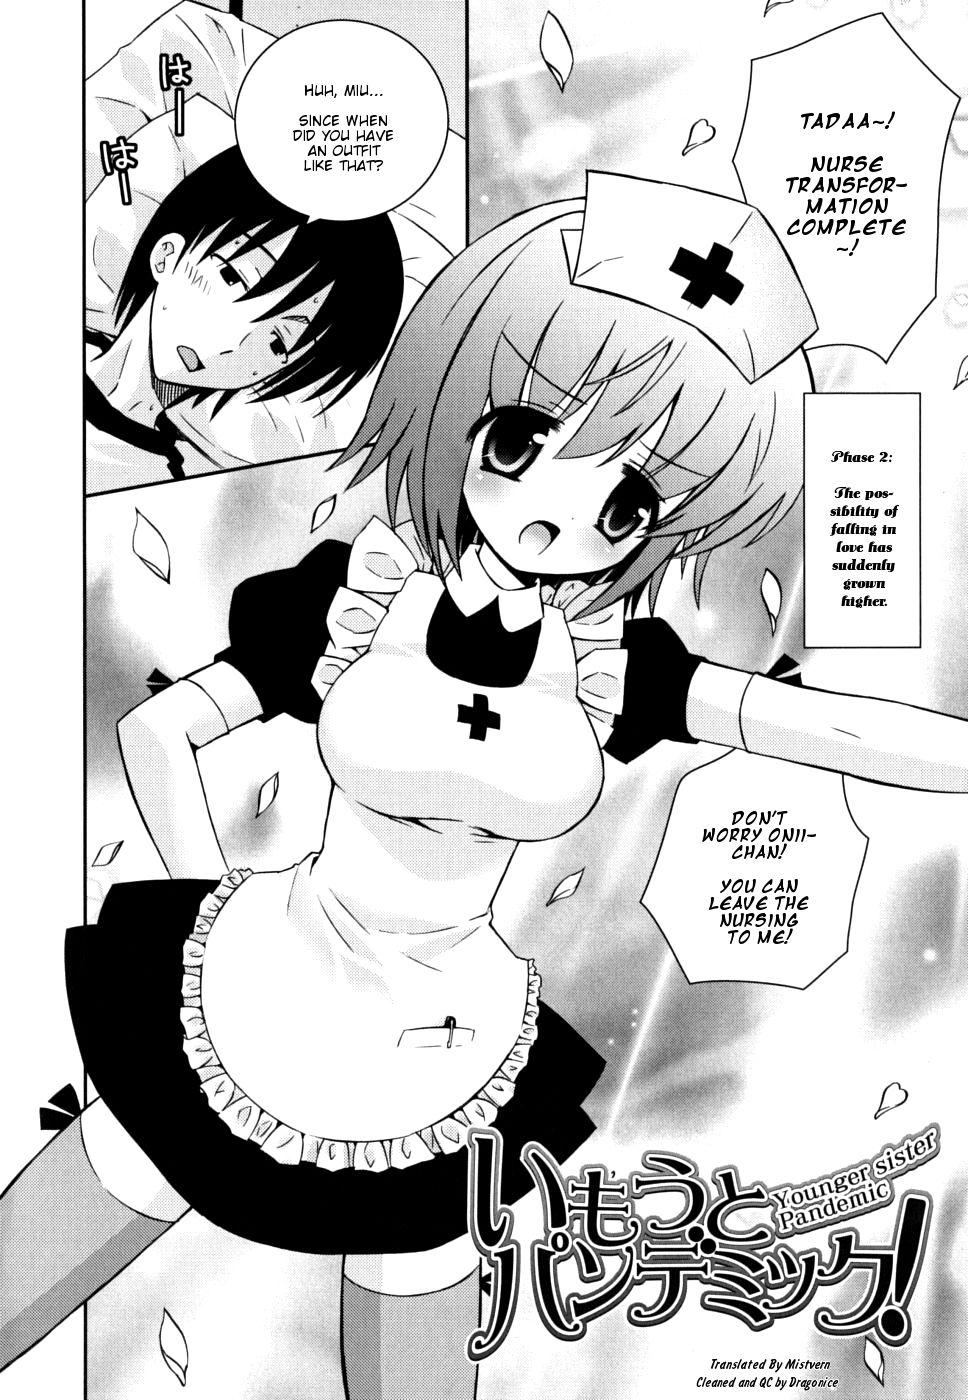 Lick Imouto Pandemic! - Younger sister Pandemic Bdsm - Page 2